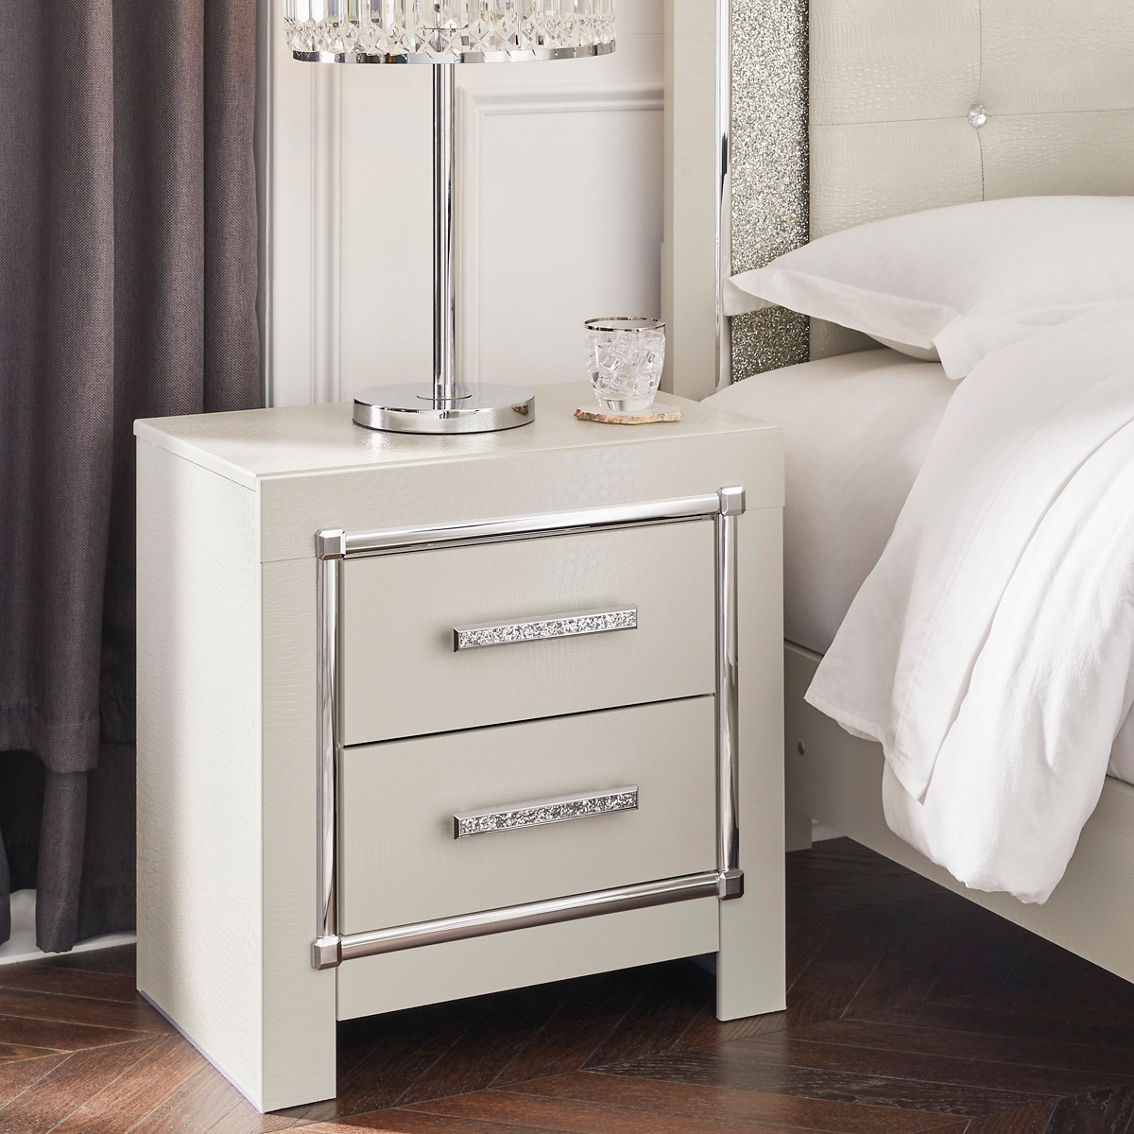 Signature Design by Ashley Zyniden Nightstand - Image 4 of 7